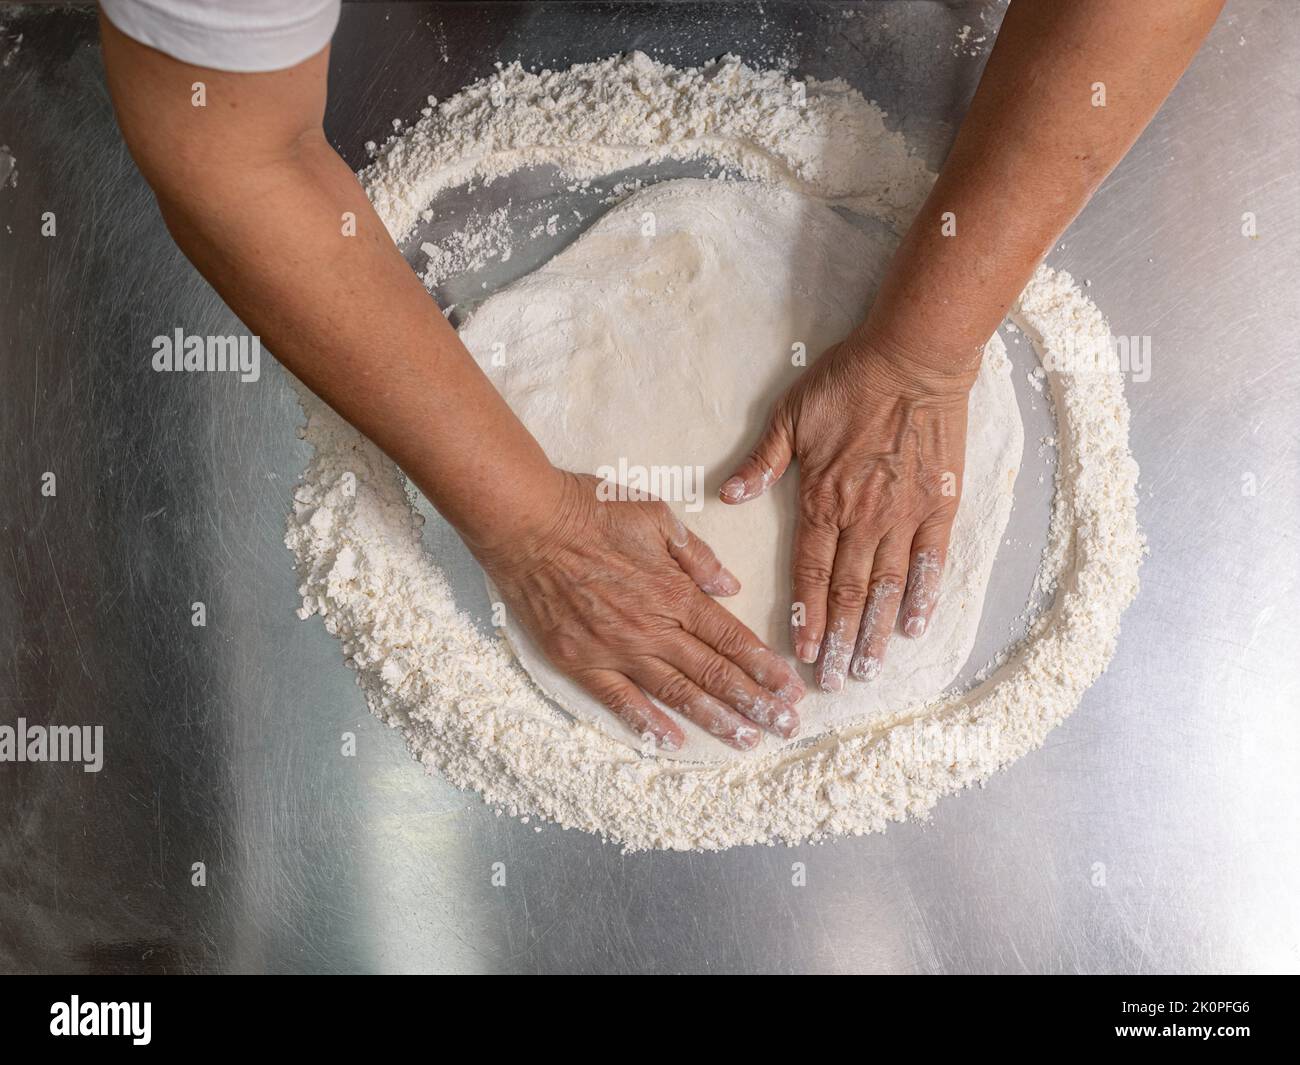 Woman making pizza dough on stainless steel counter Stock Photo